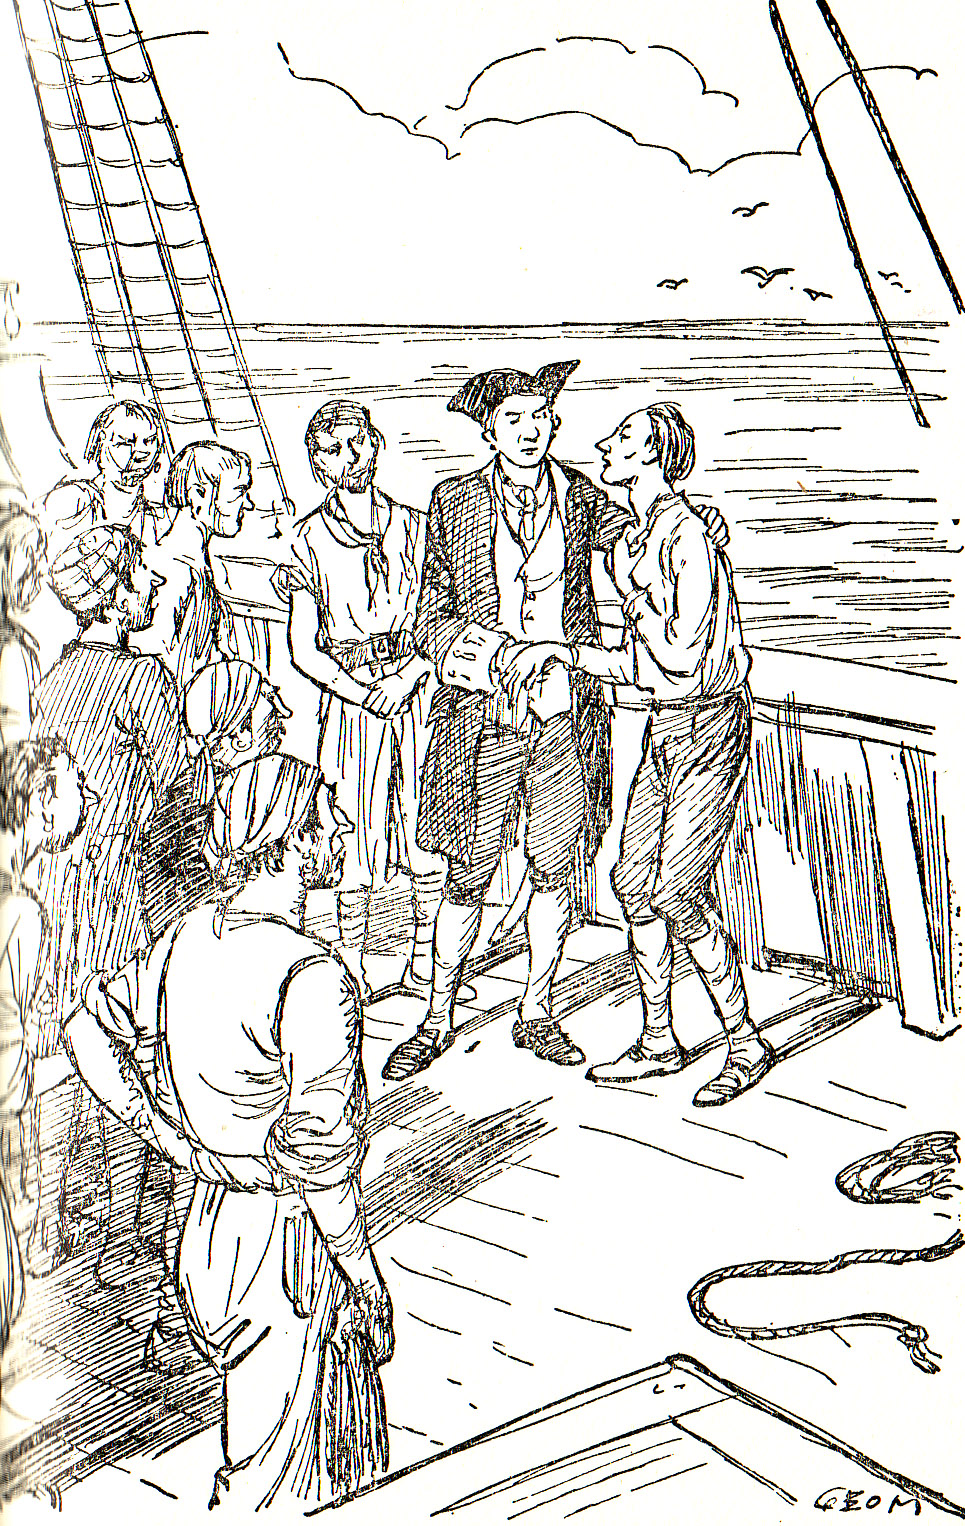 From Chapter 8 - A Voyage To Brobdingnag (Gulliver's Travels) illustrated by George Morrow